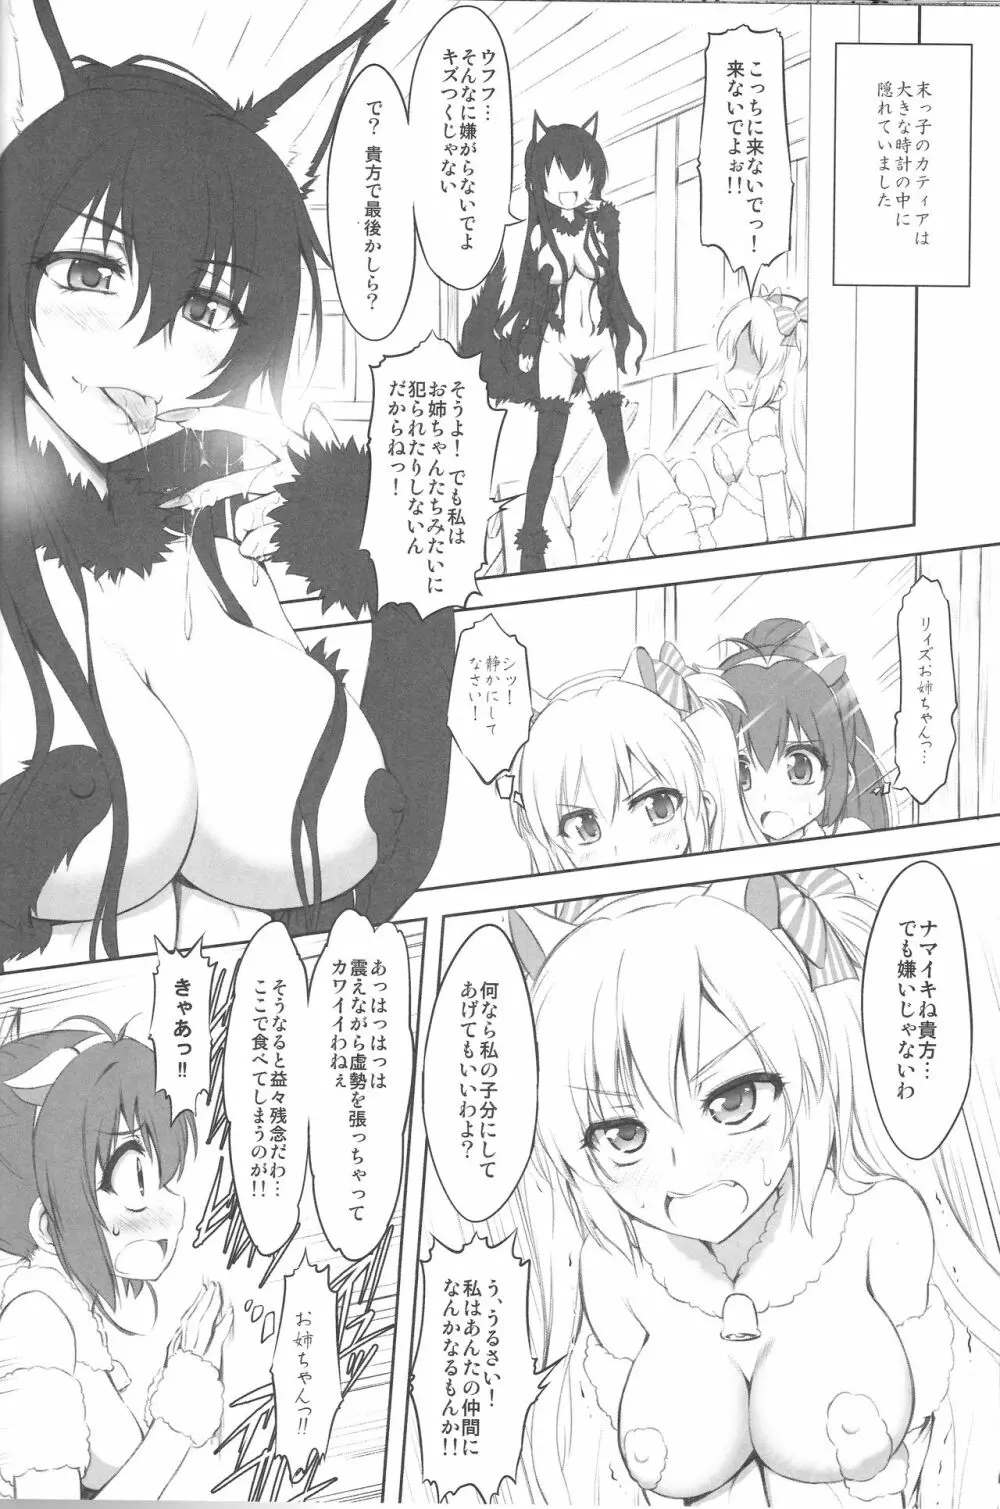 7Girls and wolf Page.19